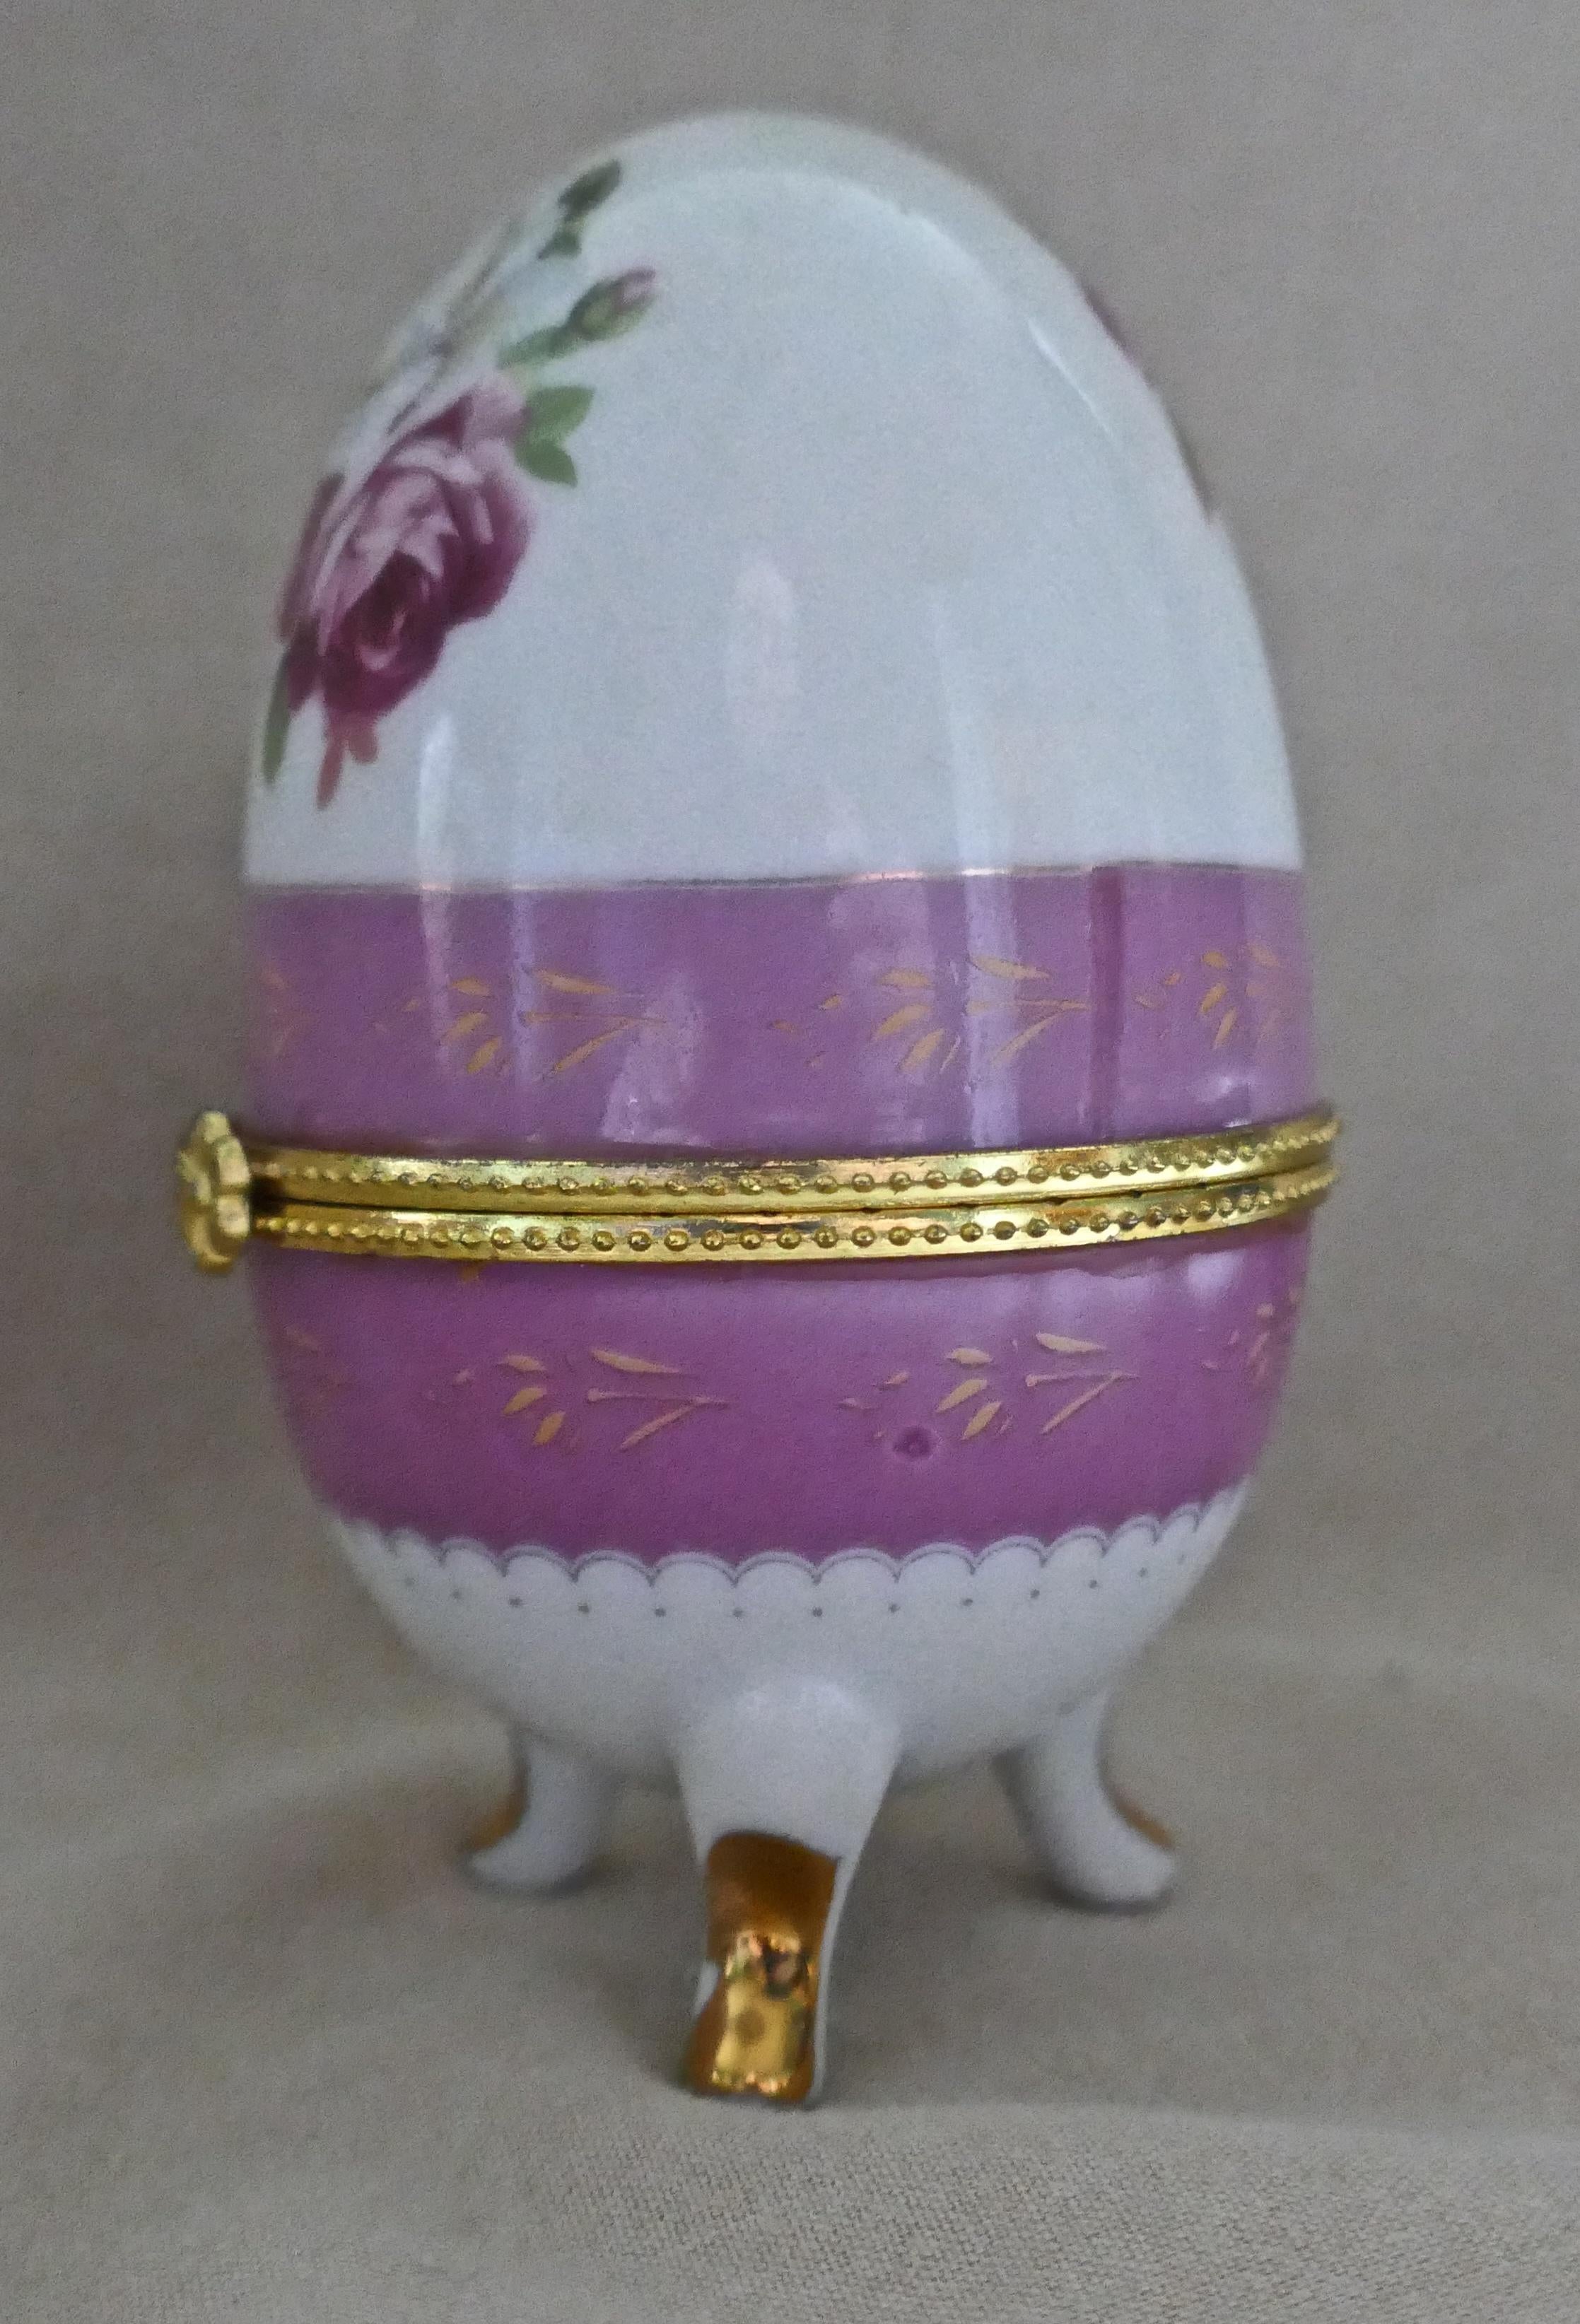 Vintage rose Chintz egg shaped ceramic trinket box with hinged lid

This 20th century vintage ceramic egg (Trinket Box) stands on shaped legs, it is decorated with roses in pink and yellow
The box is in very good condition, the catch has a nice